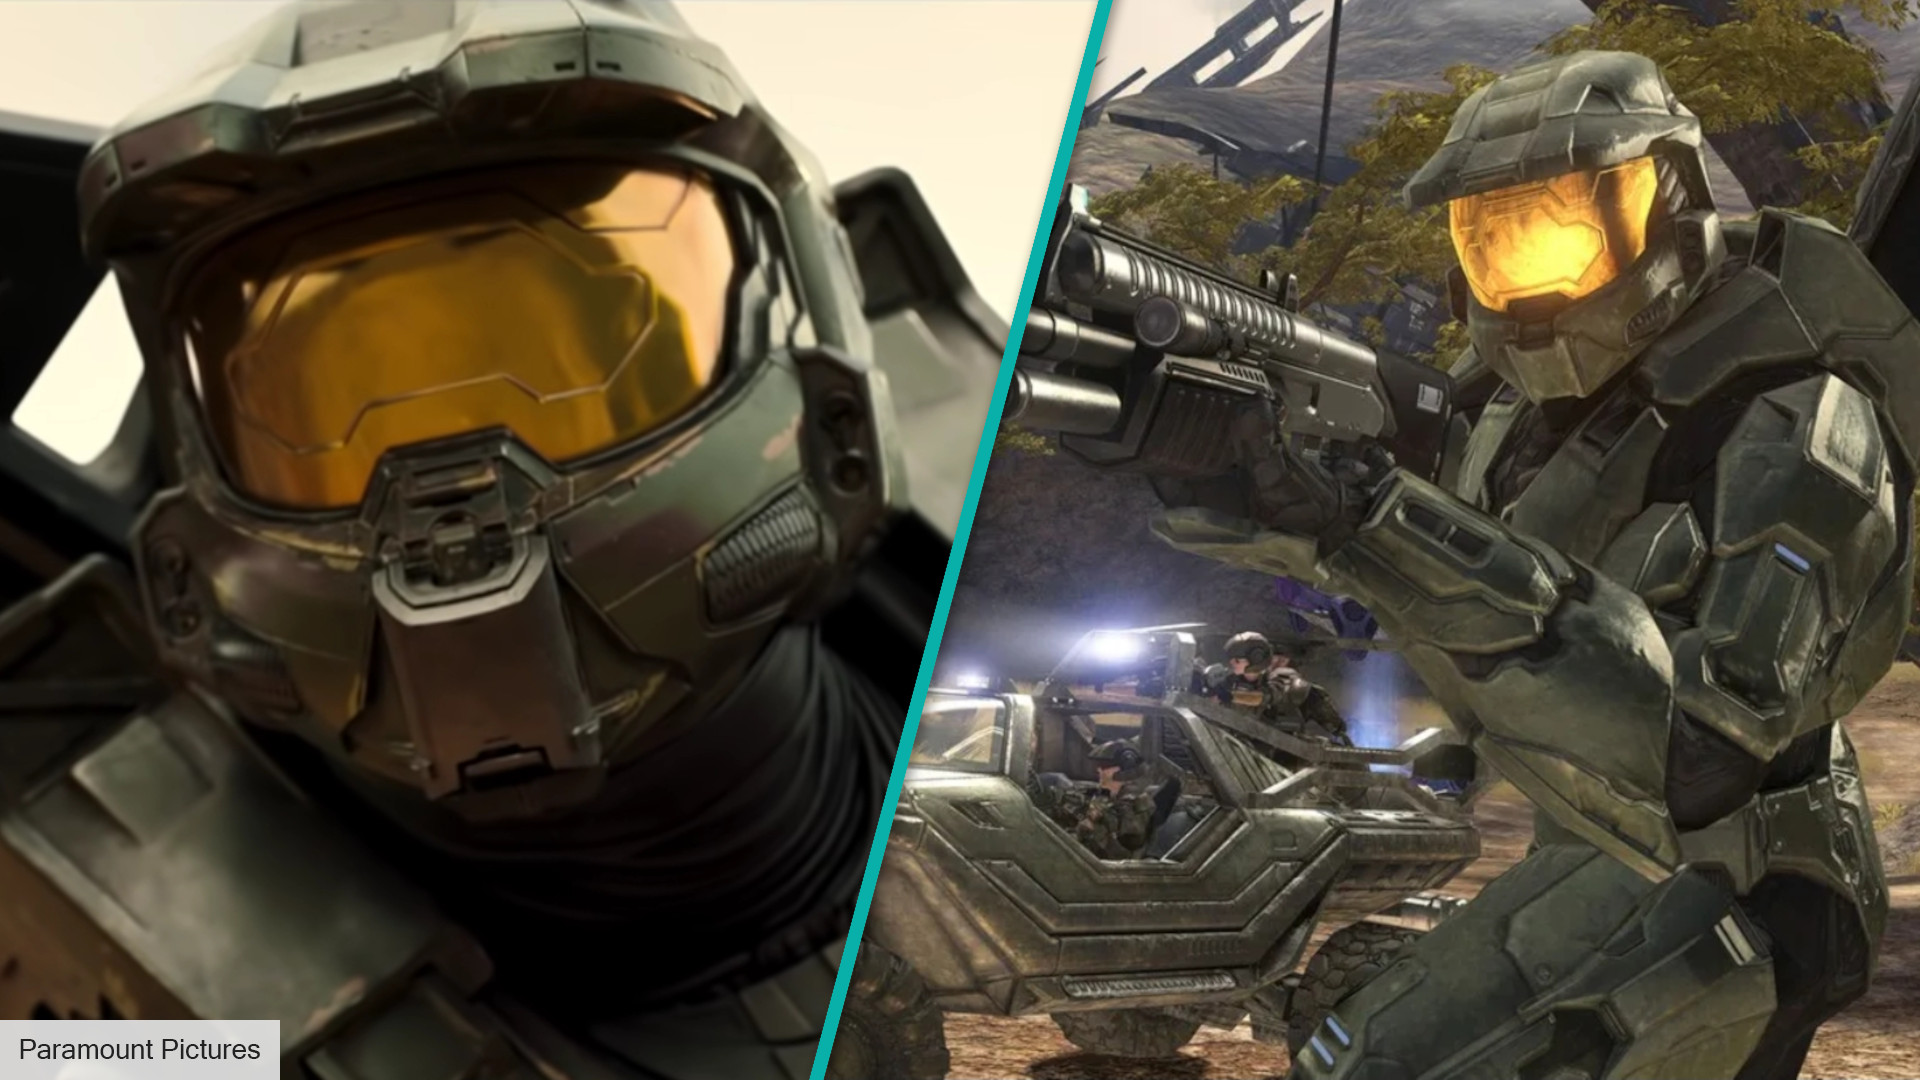 Live-action Halo TV show release date revealed in new trailers